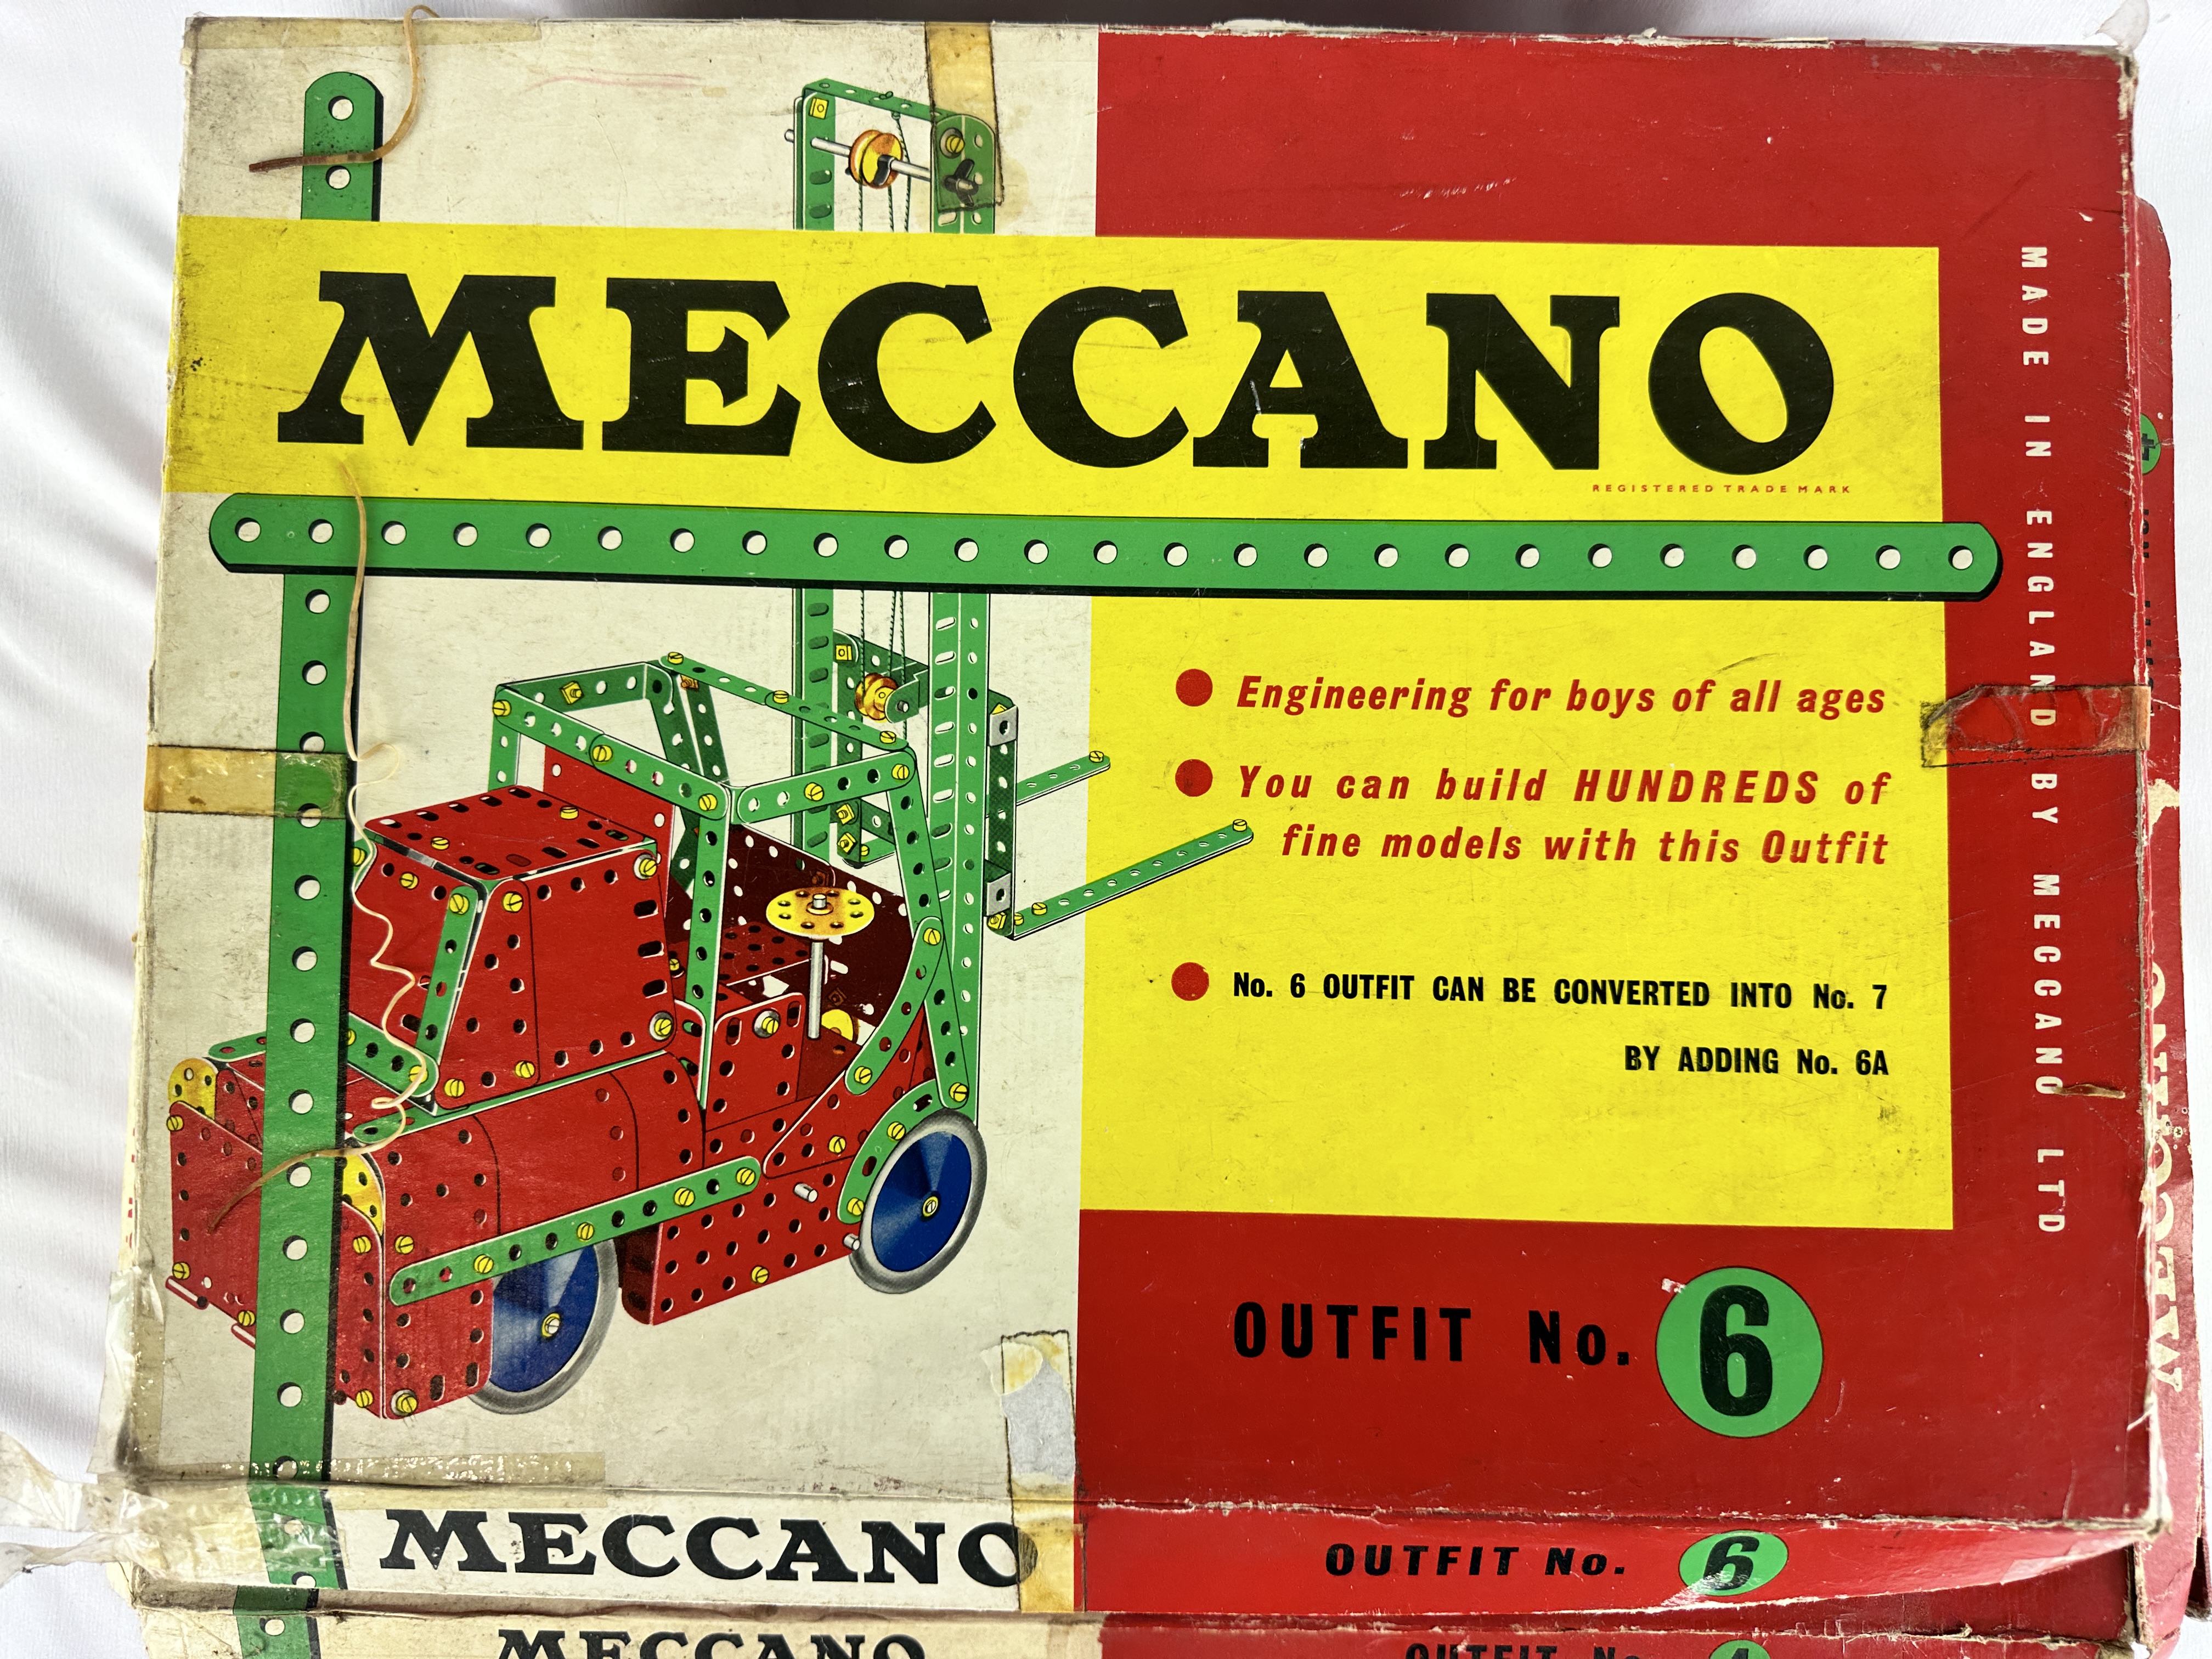 Two boxes of Meccano